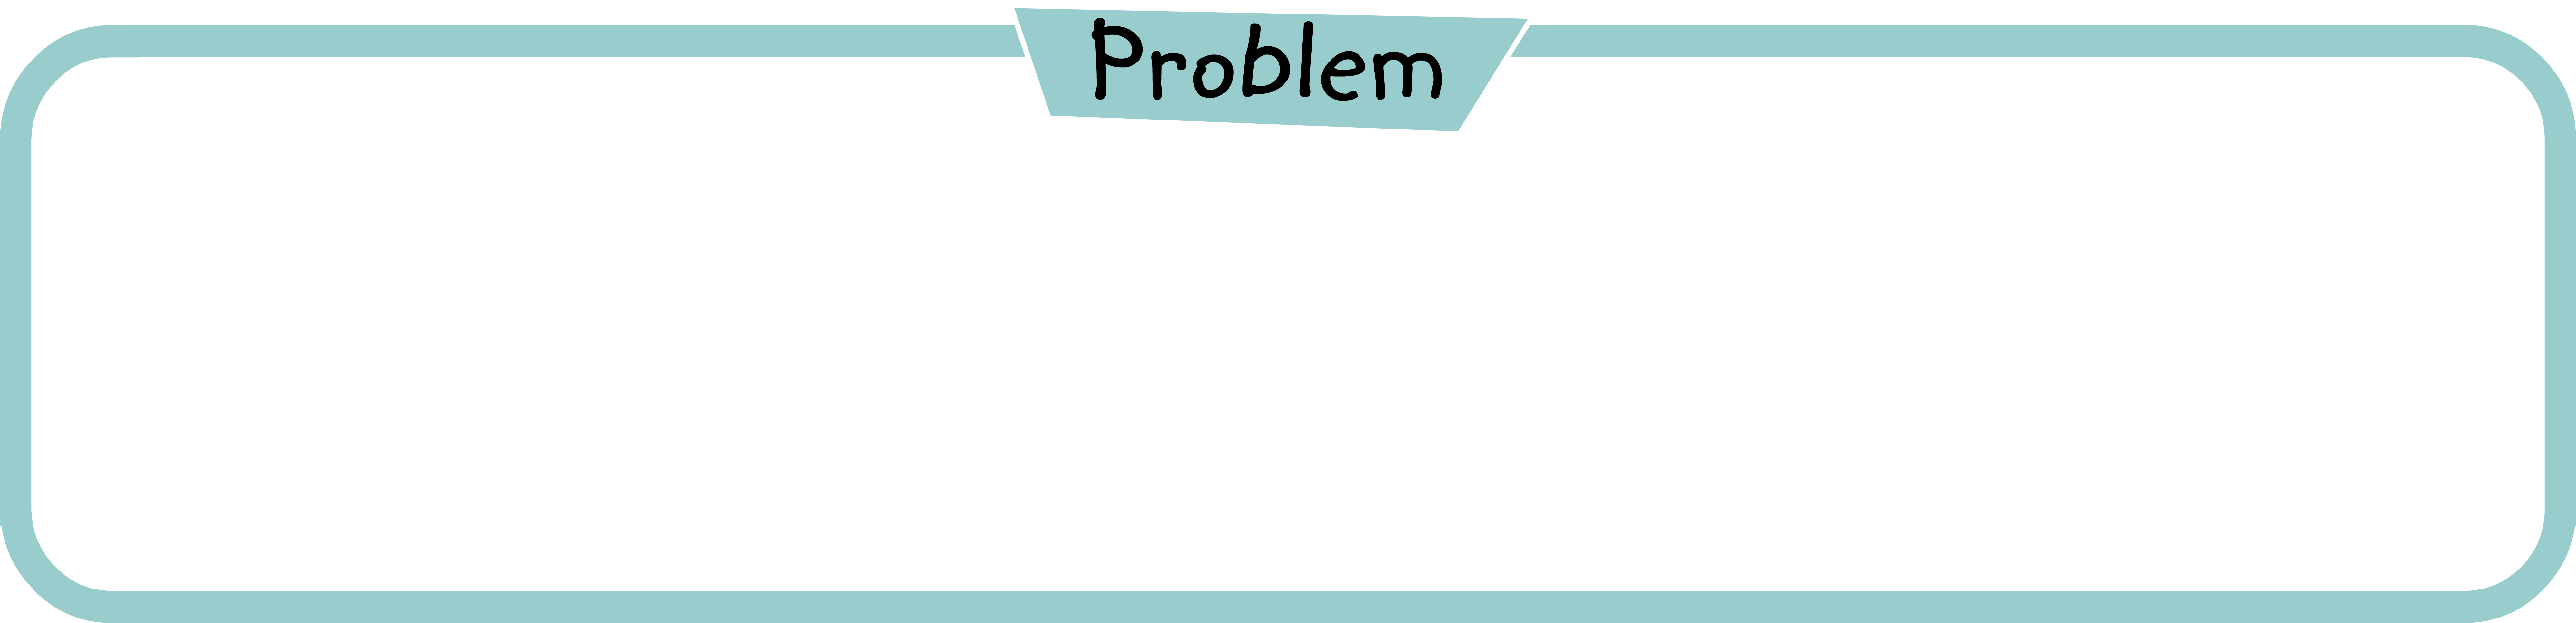 Grouping Tool : Problem